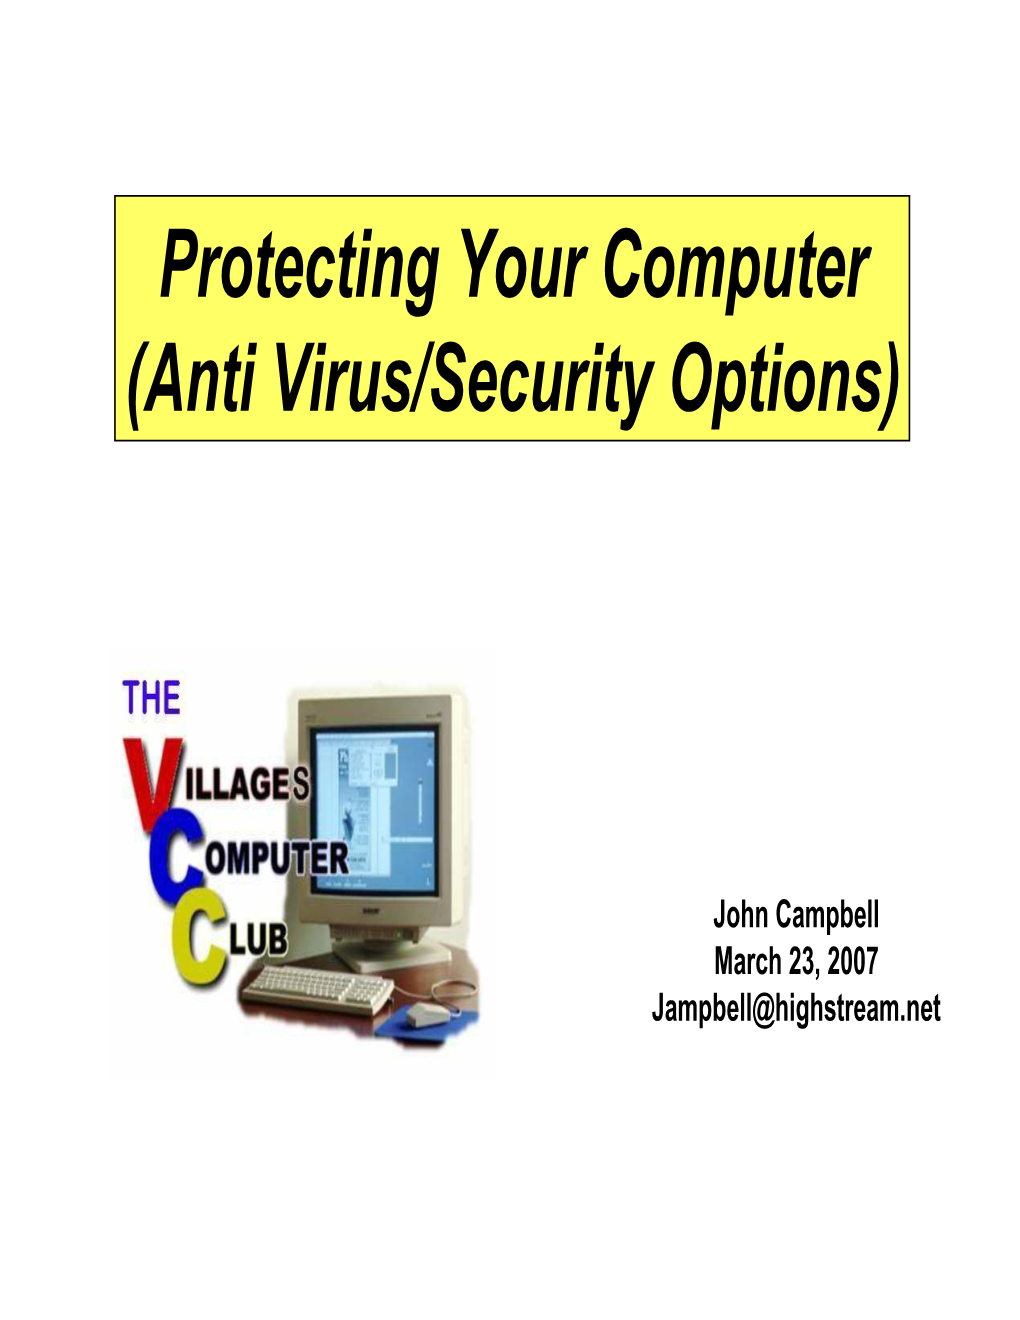 Protecting Your Computer (Anti Virus/Security Options)